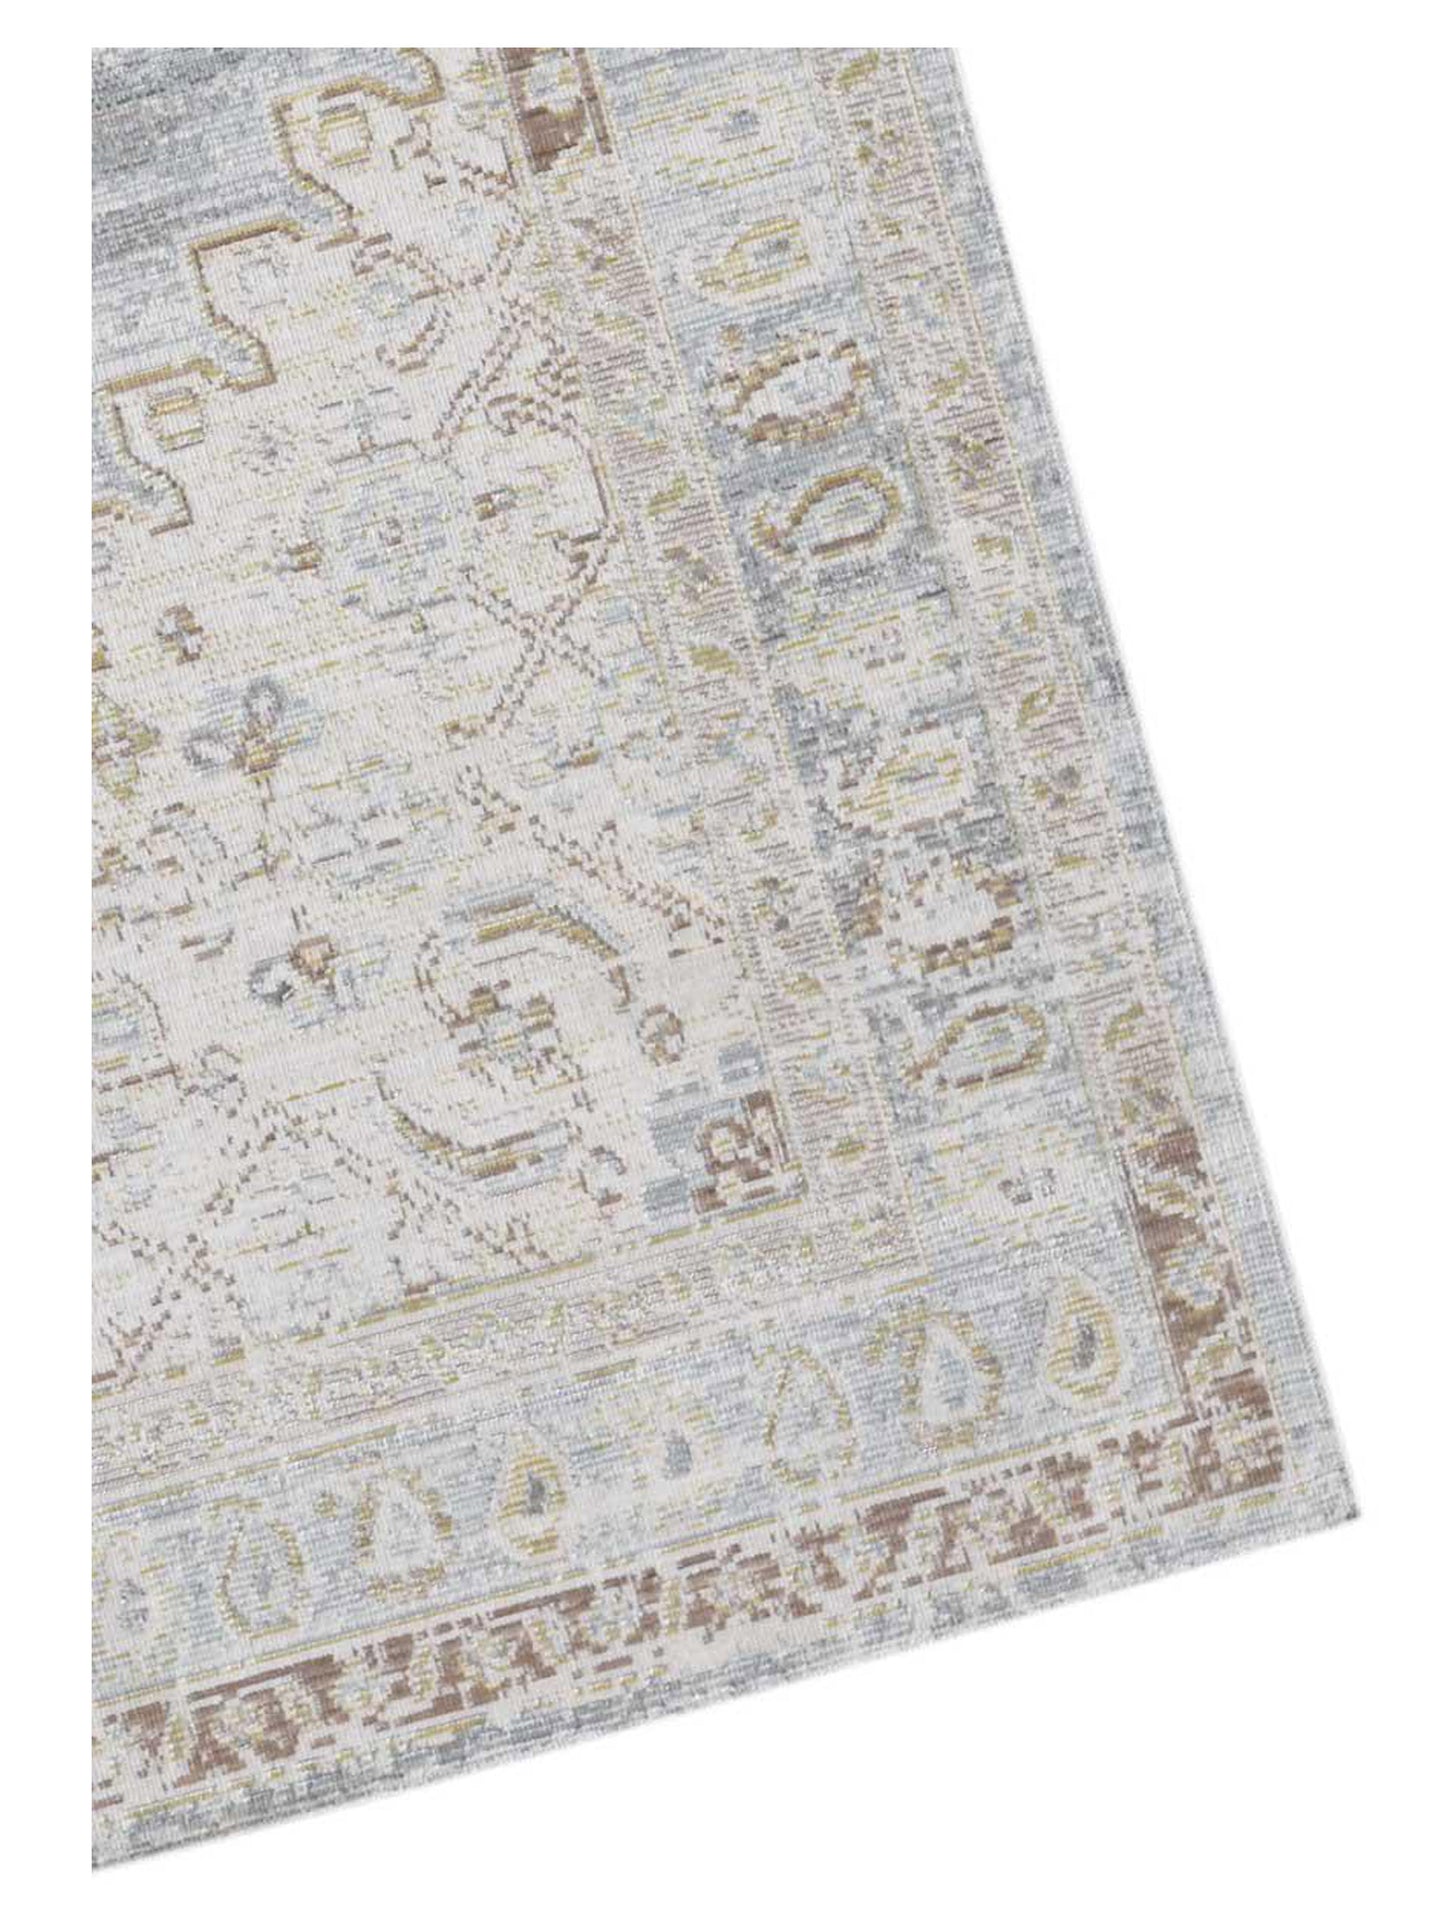 Limited Odeya OR-803 GRAY IVORY Traditional Machinemade Rug